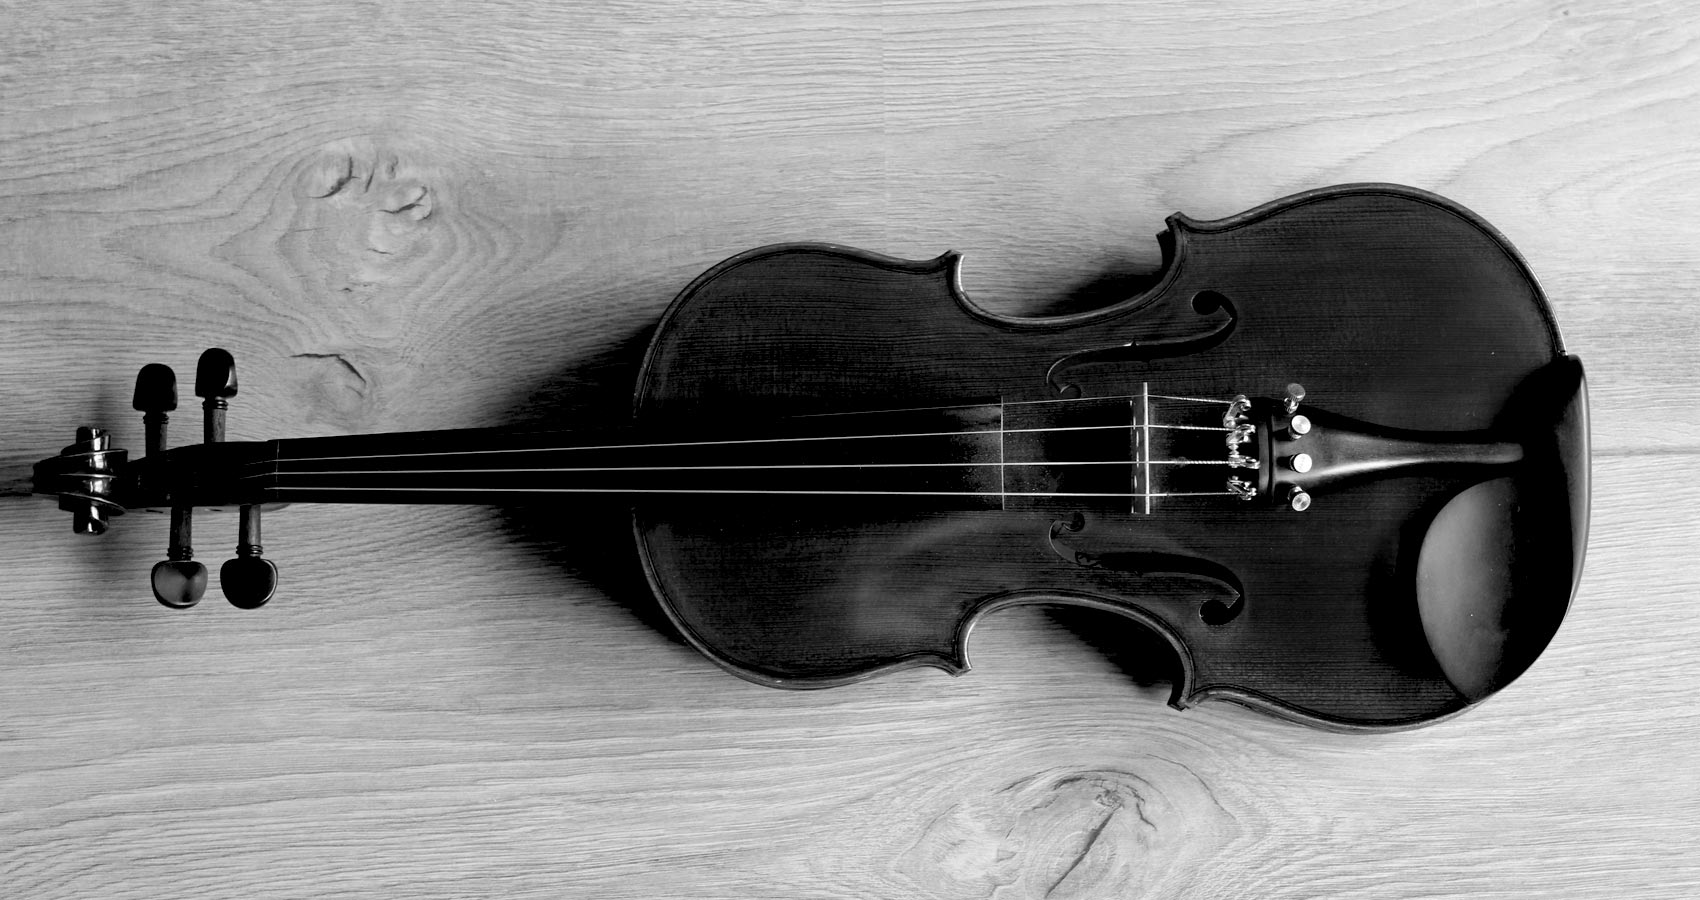 The Last Violin, a short story by Nancy Richy at Spillwords.com